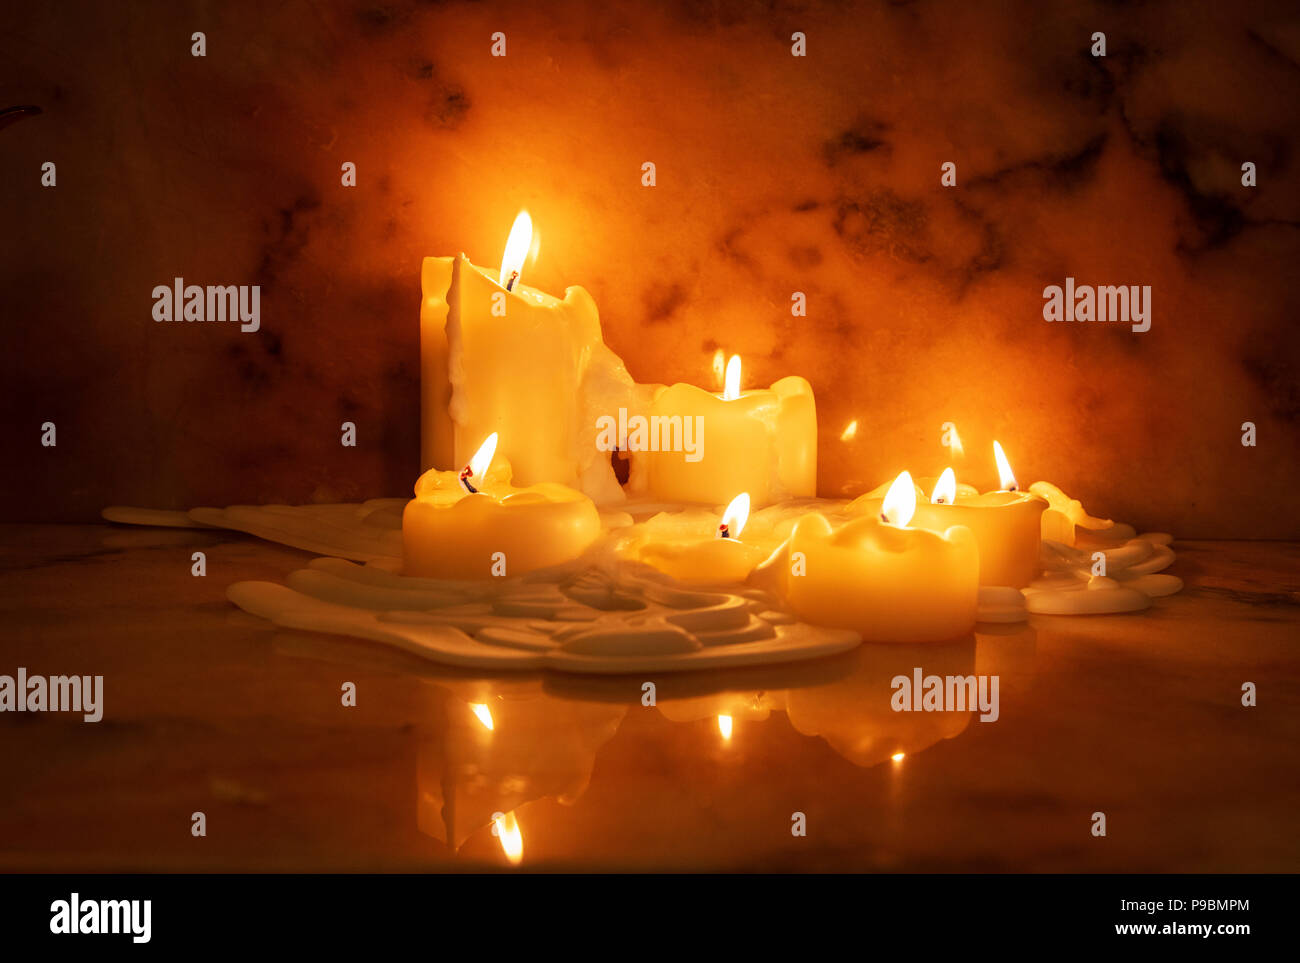 Melting wax on lighted candles reflected on a marble surface in an